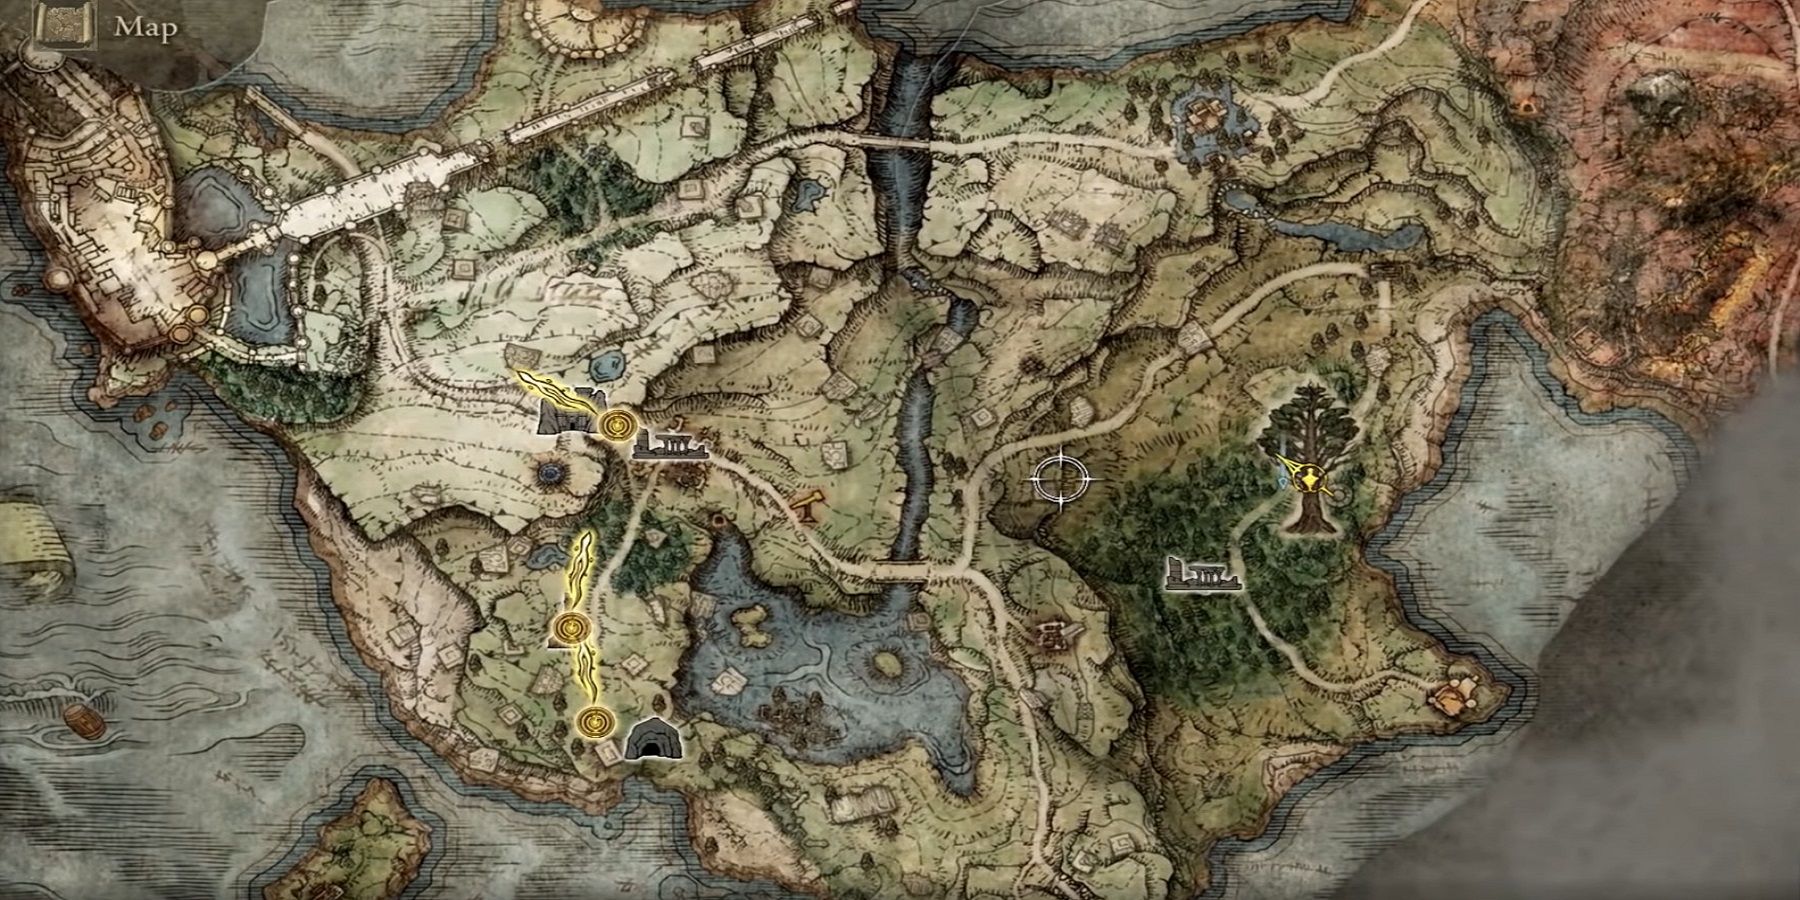 Elden Ring Fan Creates Incredible Hand-Drawn Version of the Game’s Map